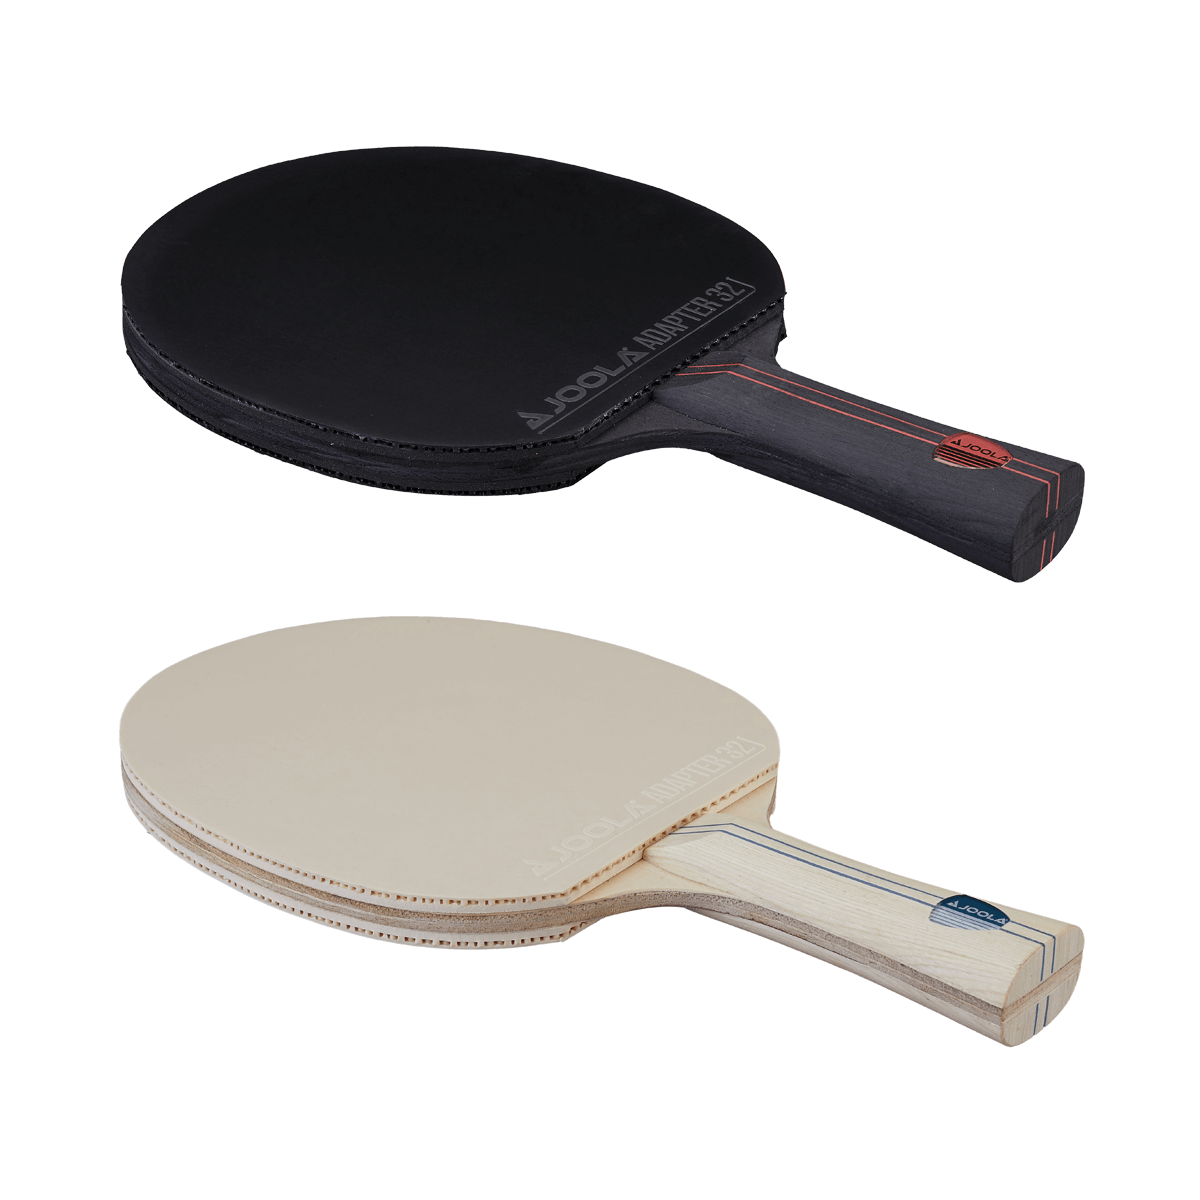 JOOLA Blizzard & Blackout - Competition Ping Pong Paddle Set